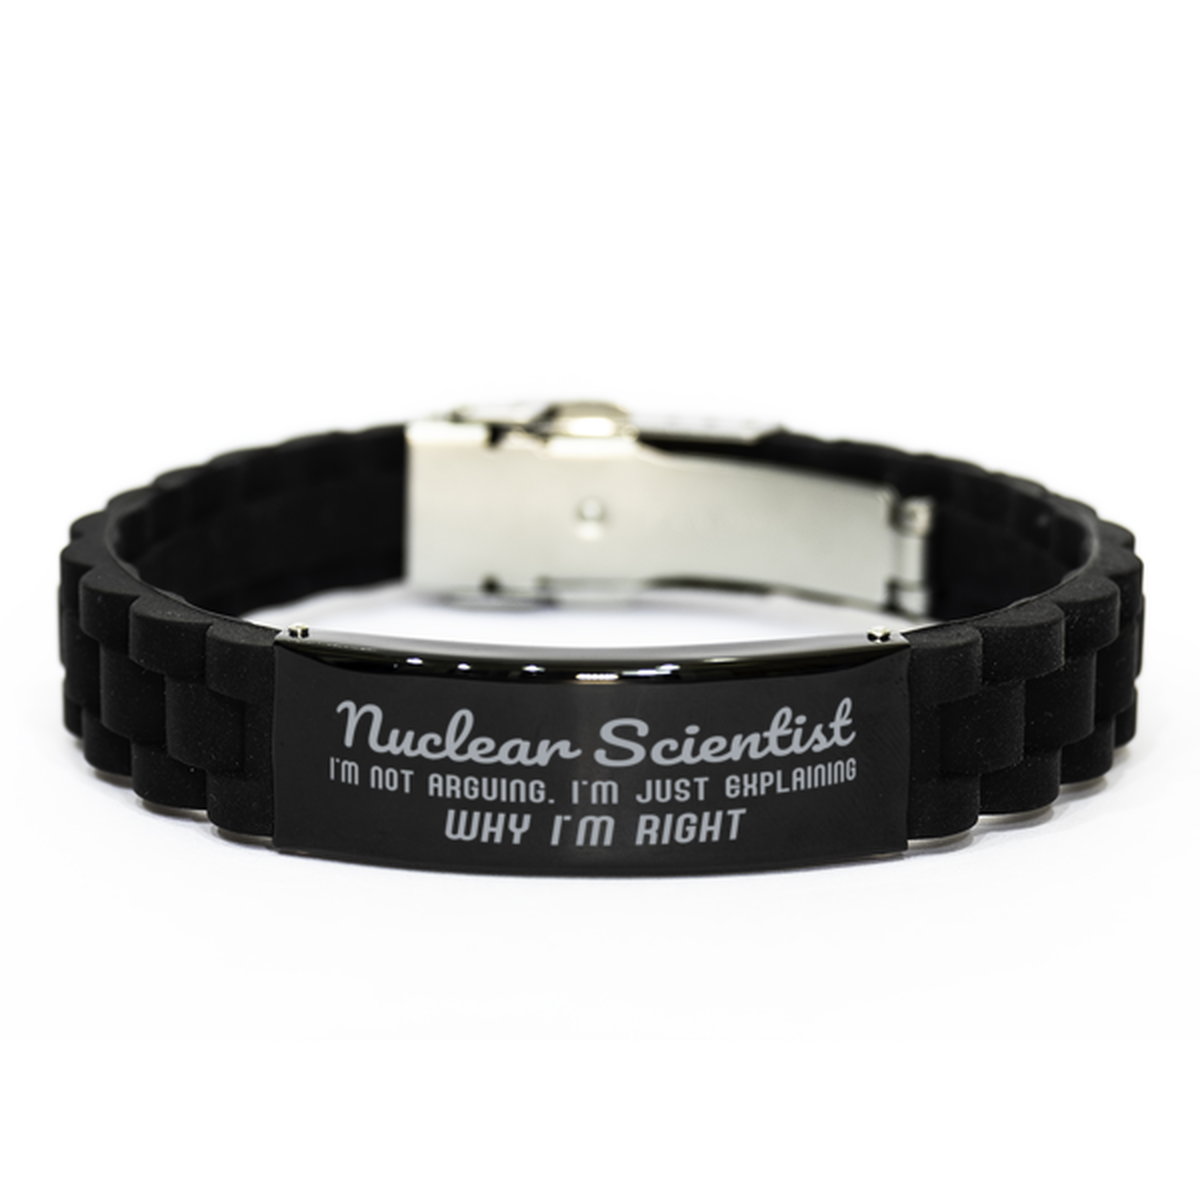 Nuclear Scientist I'm not Arguing. I'm Just Explaining Why I'm RIGHT Black Glidelock Clasp Bracelet, Funny Saying Quote Nuclear Scientist Gifts For Nuclear Scientist Graduation Birthday Christmas Gifts for Men Women Coworker